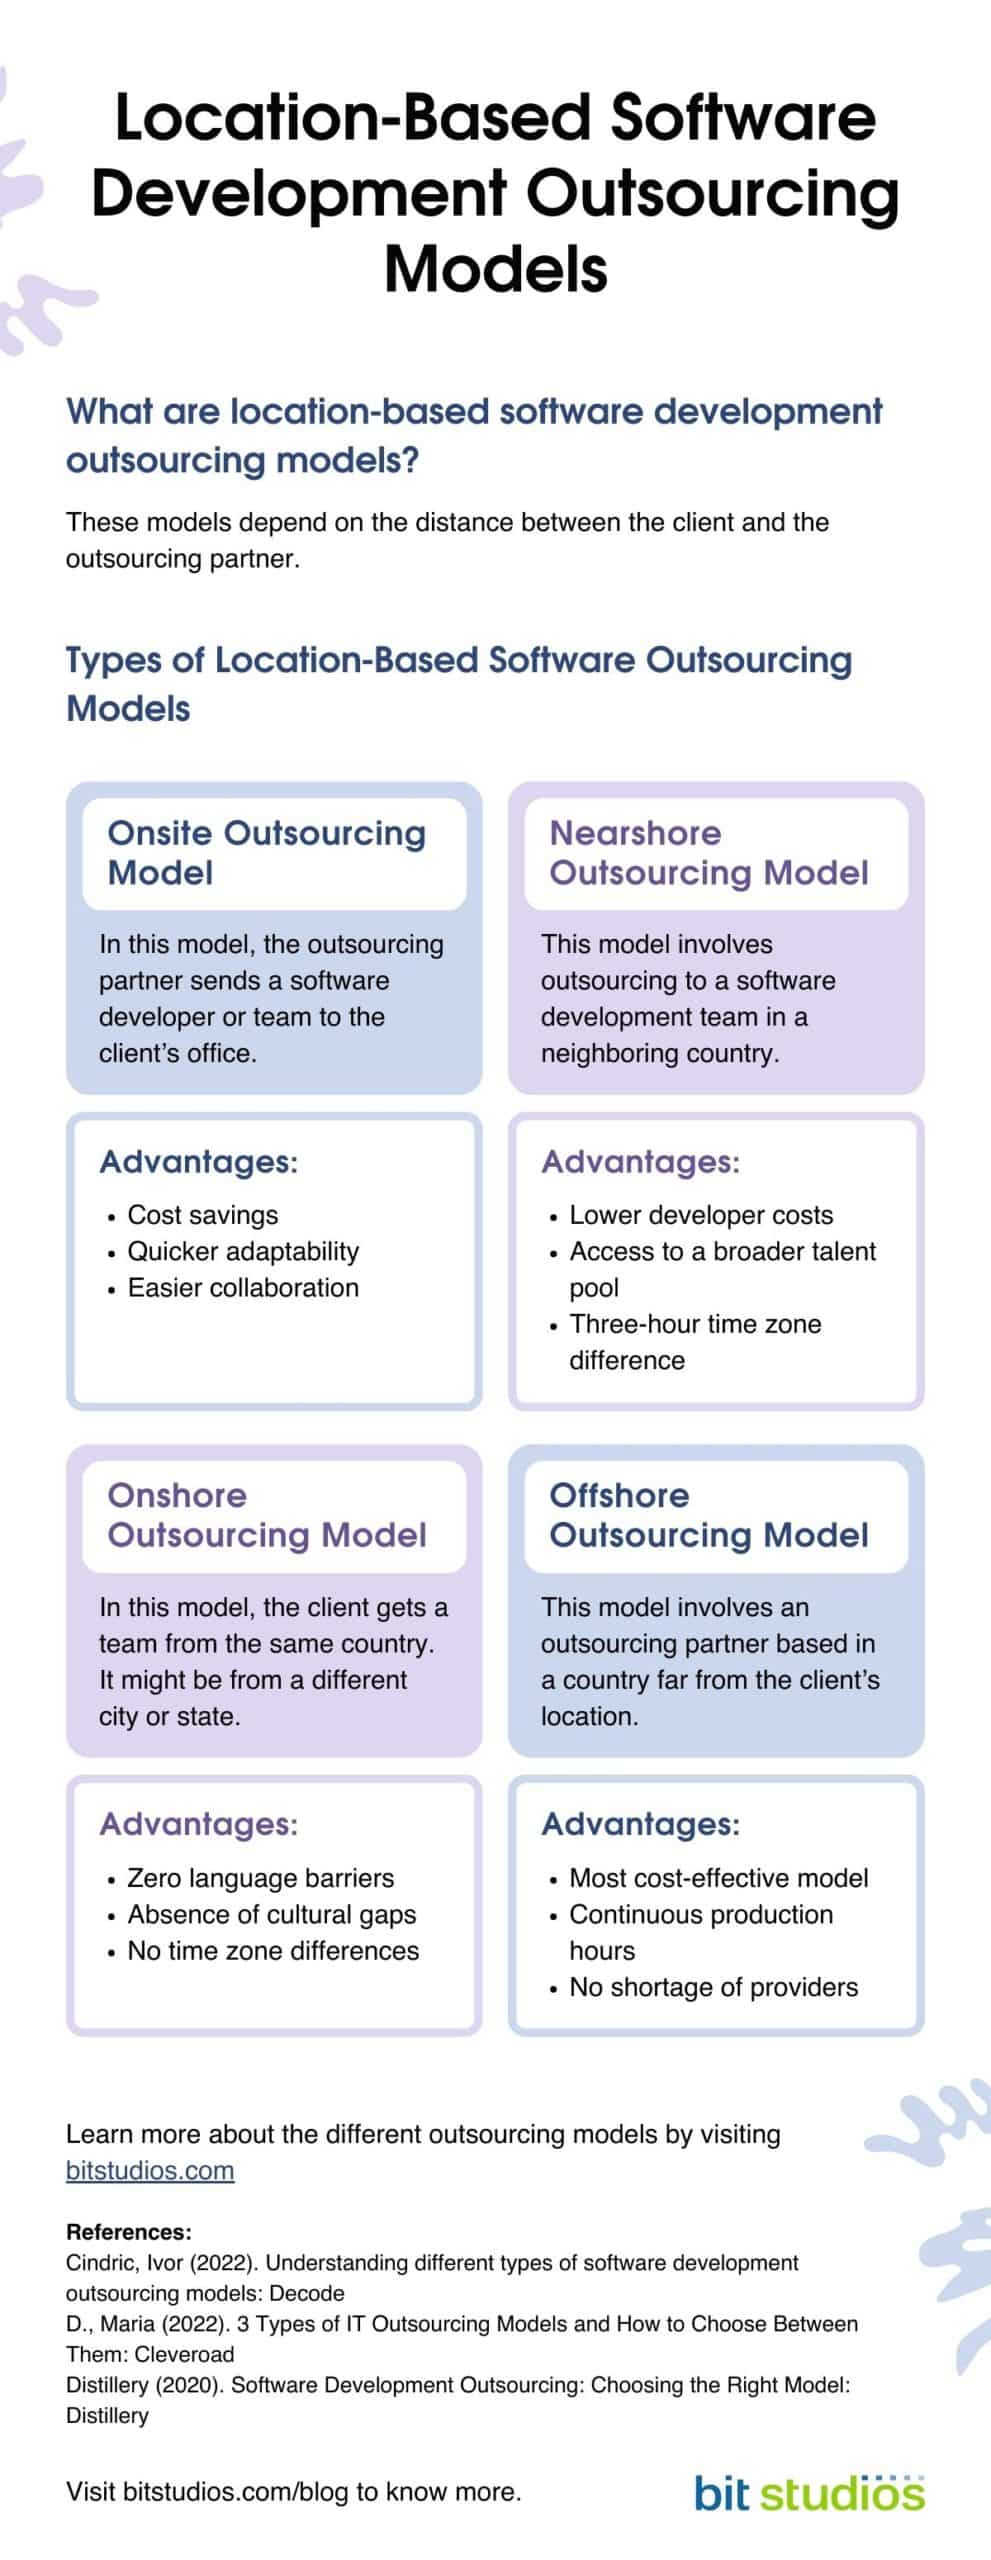 Location-Based Software Development Outsourcing Models